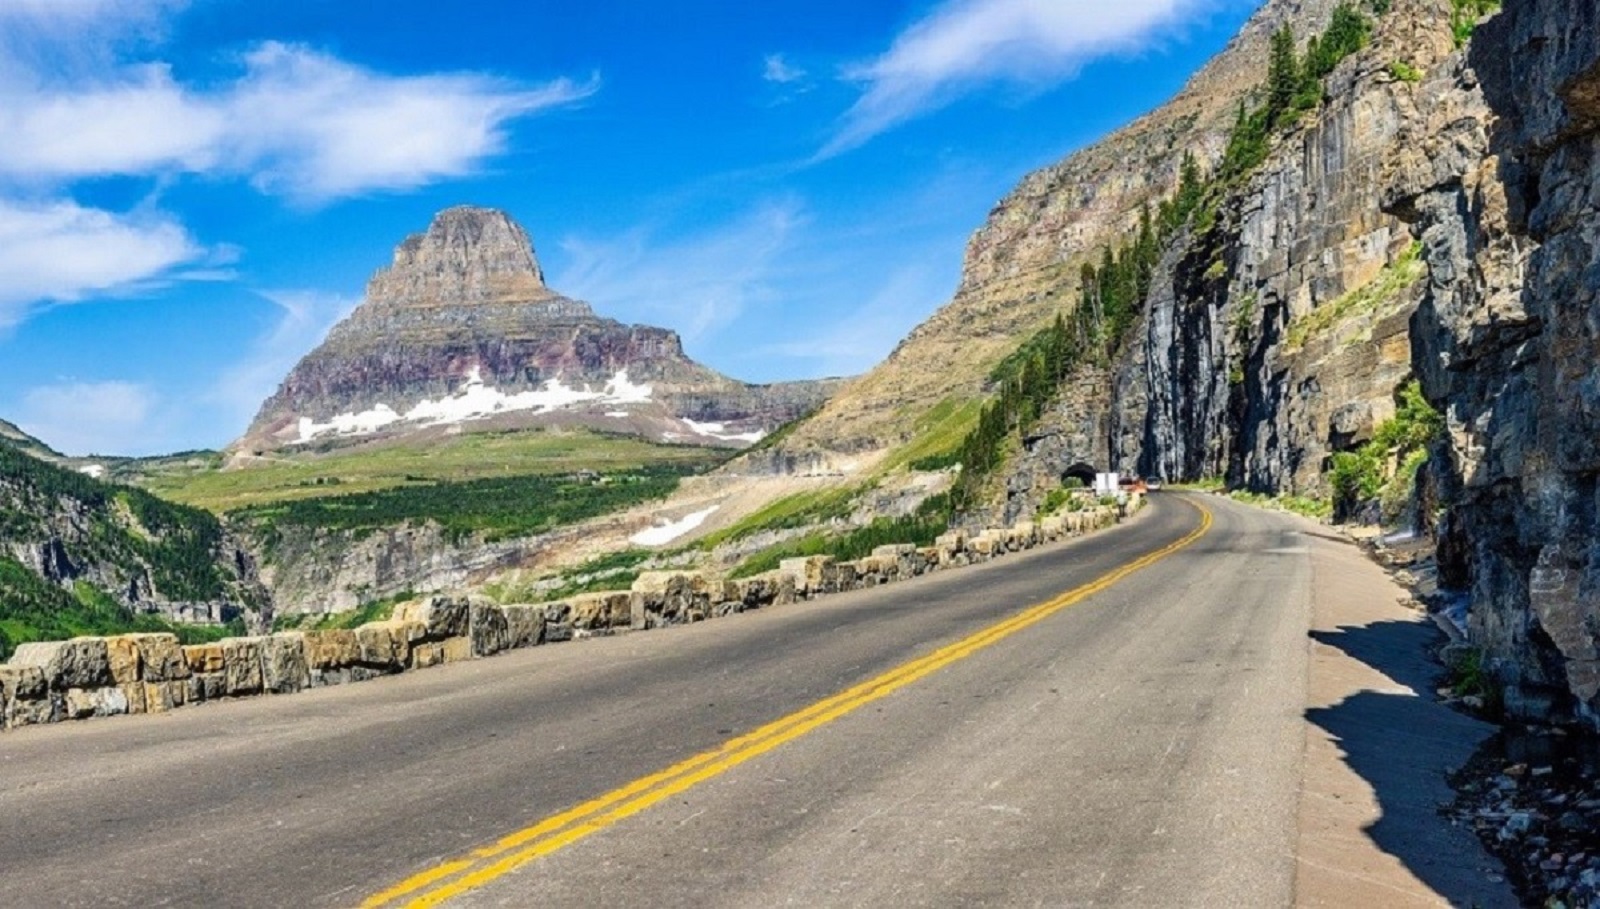 <p class="wp-caption-text">Image Credit: Shutterstock / Mihai_Andritoiu</p>  <p><span>Venture into the heart of Glacier National Park on Going-to-the-Sun Road, a scenic drive that winds through towering mountains and alpine meadows. With hairpin turns and awe-inspiring vistas, it’s a must-visit destination for any car lover seeking adventure.</span></p>